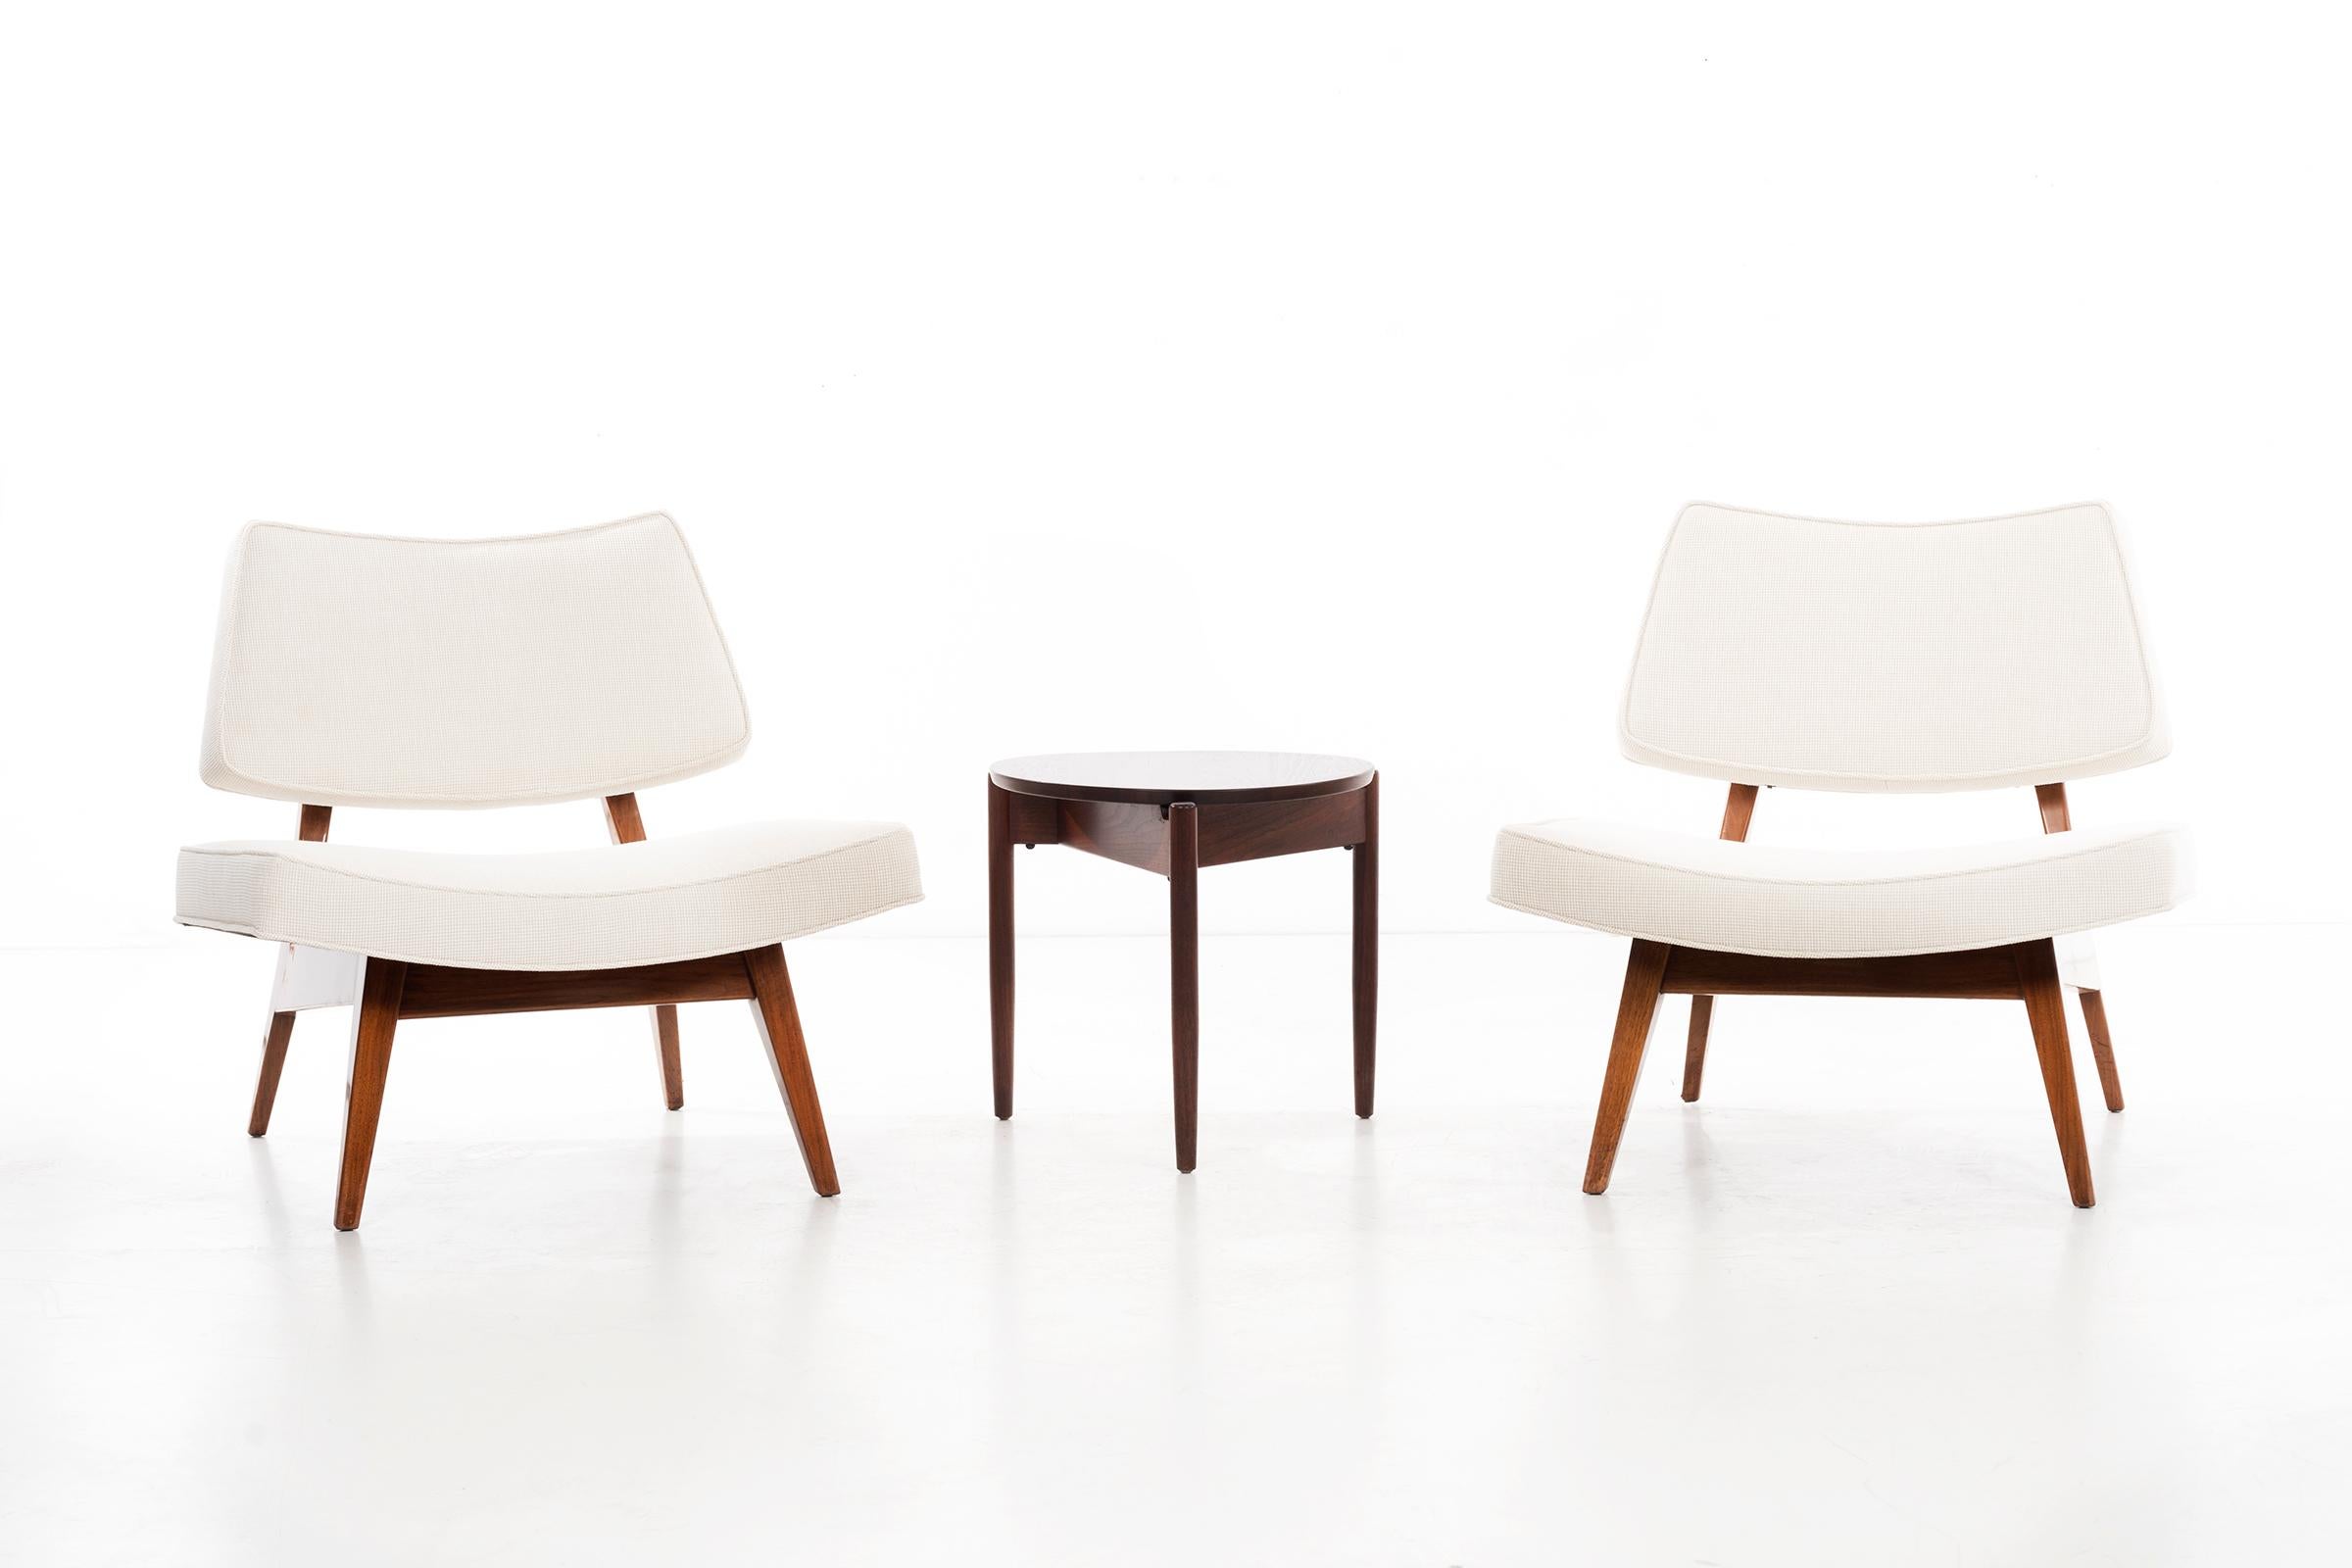 Mid-20th Century Jens Risom Lounge Chairs